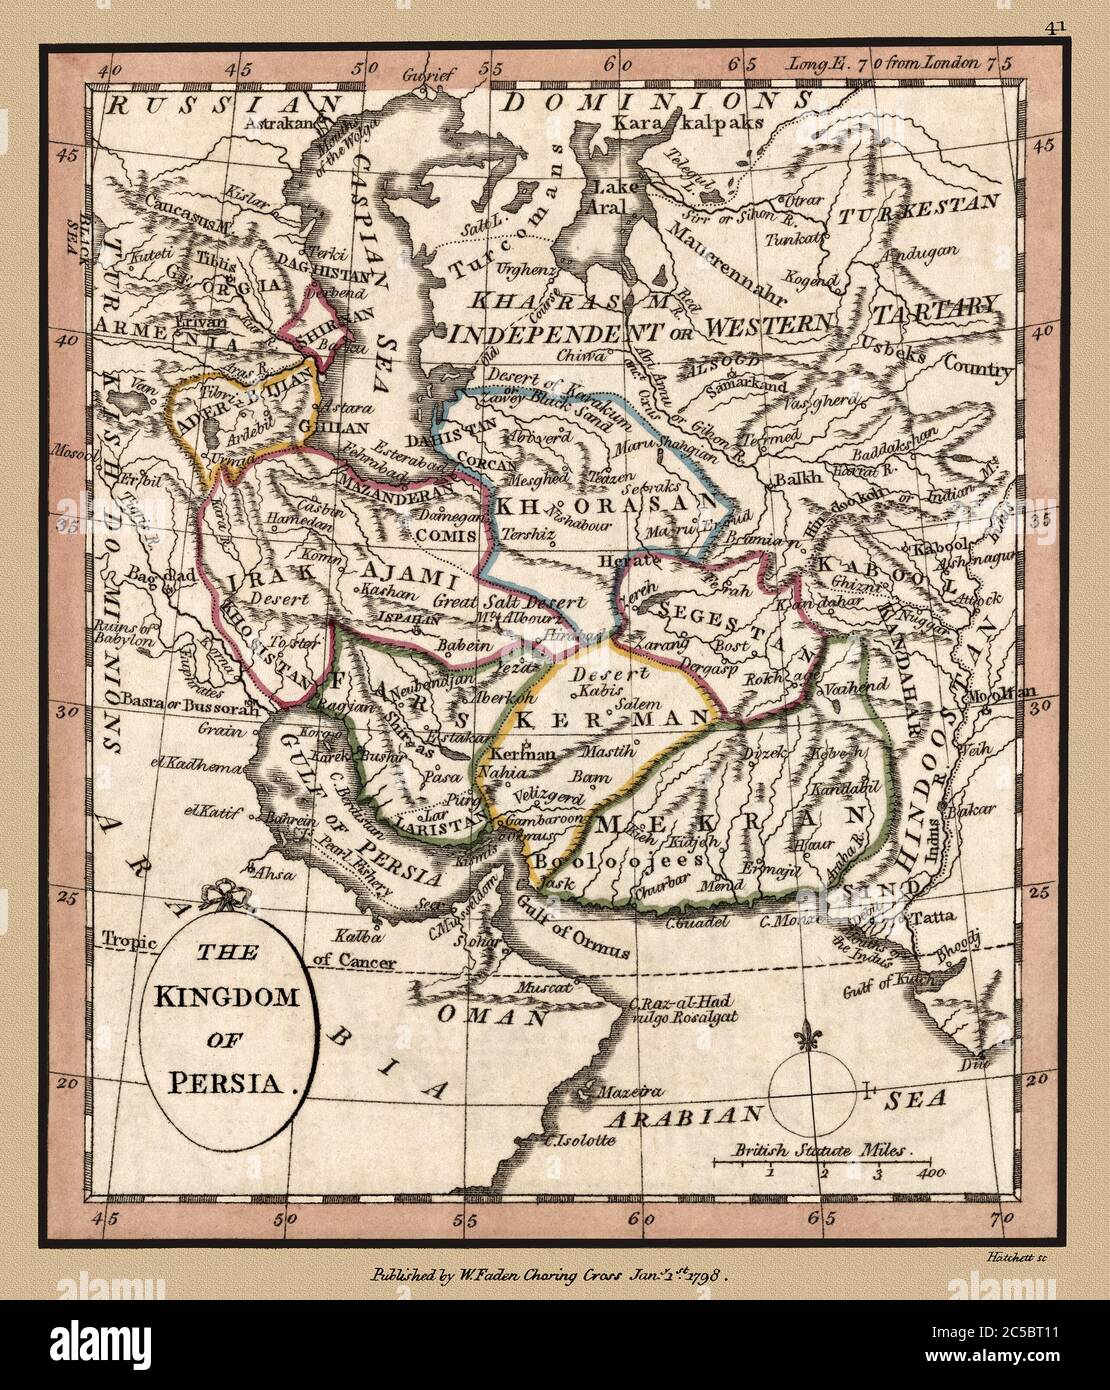 'Kingdom of Persia' Map shows political borders and important landmarks. This is a beautifully detailed historic map reproduction. Original from a British atlas published by famed cartographer William Faden was created circa 1798. Stock Photo